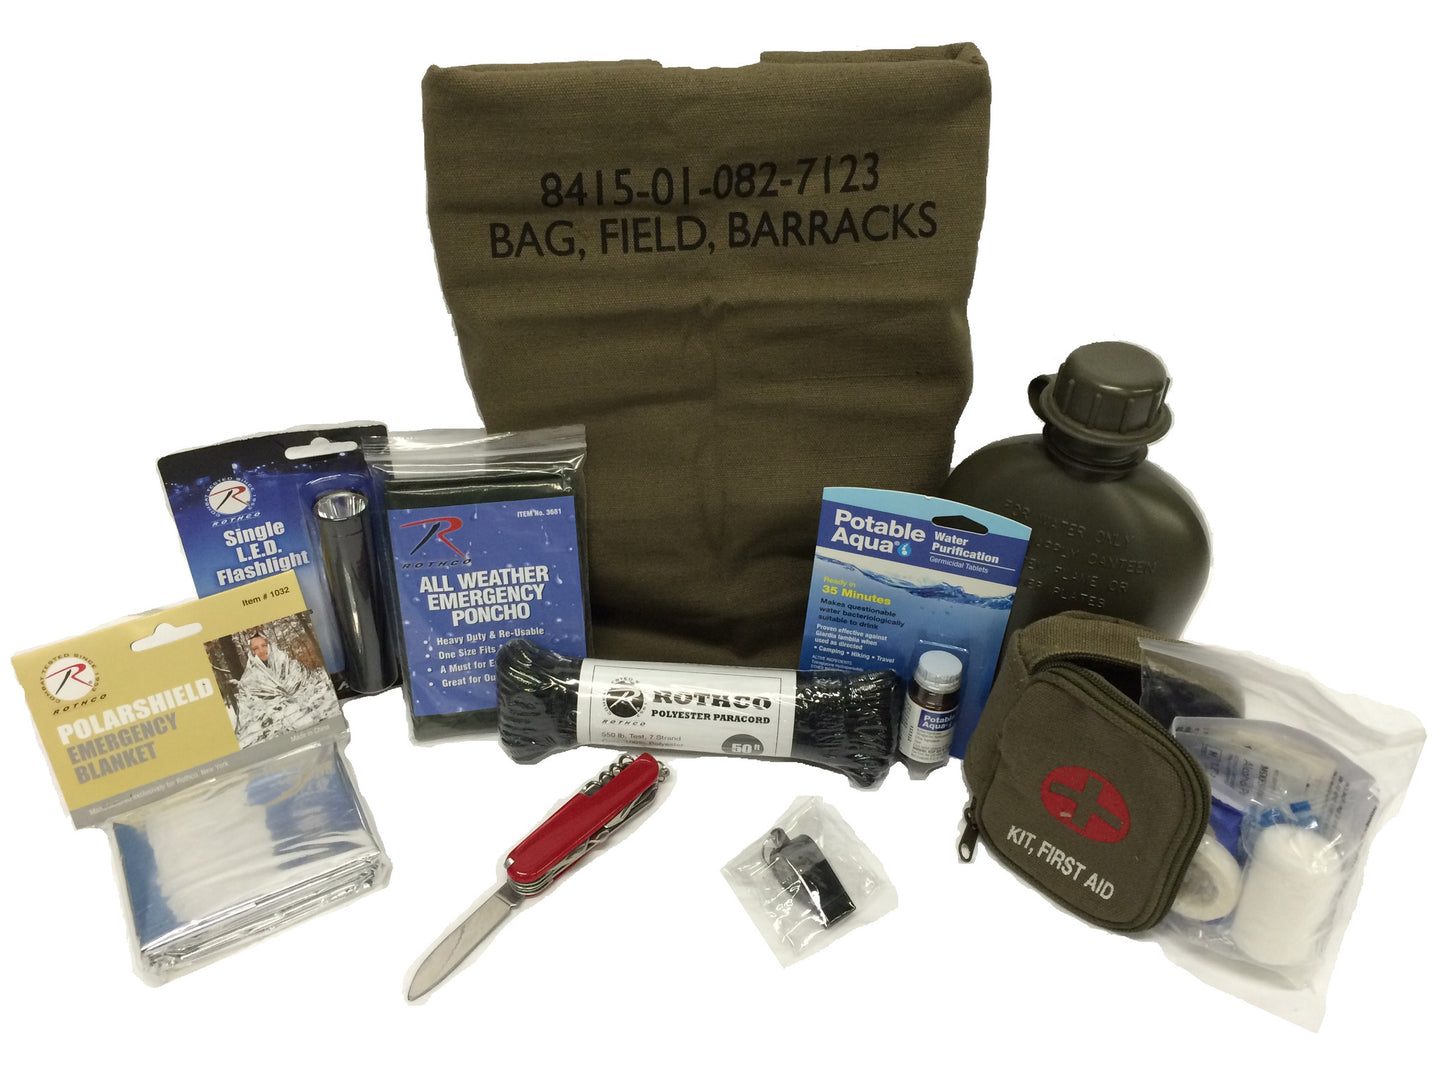 72 Hour Emergency Disaster Survival Kit - Zombie Apocalypse Prepper Bug Out Bag